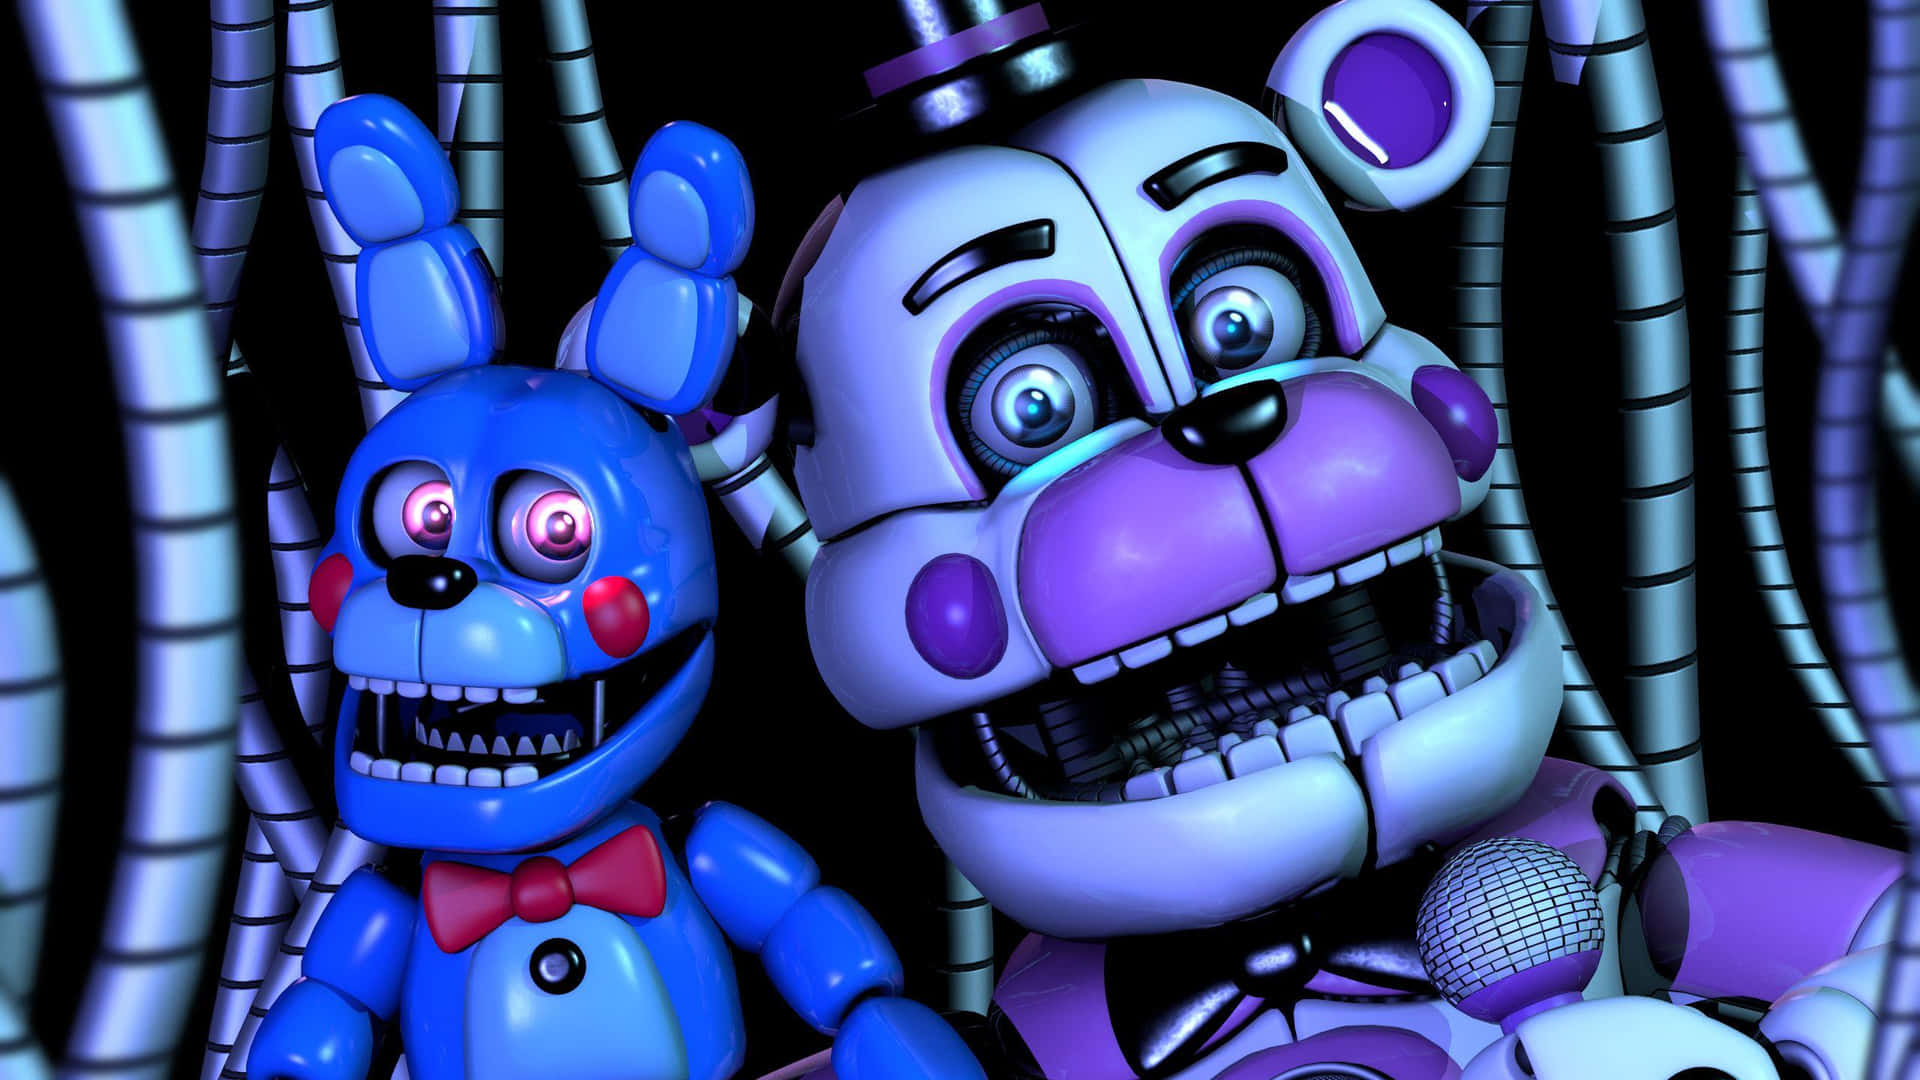 Funtime Freddy - The Entertainer of the Night Wallpaper